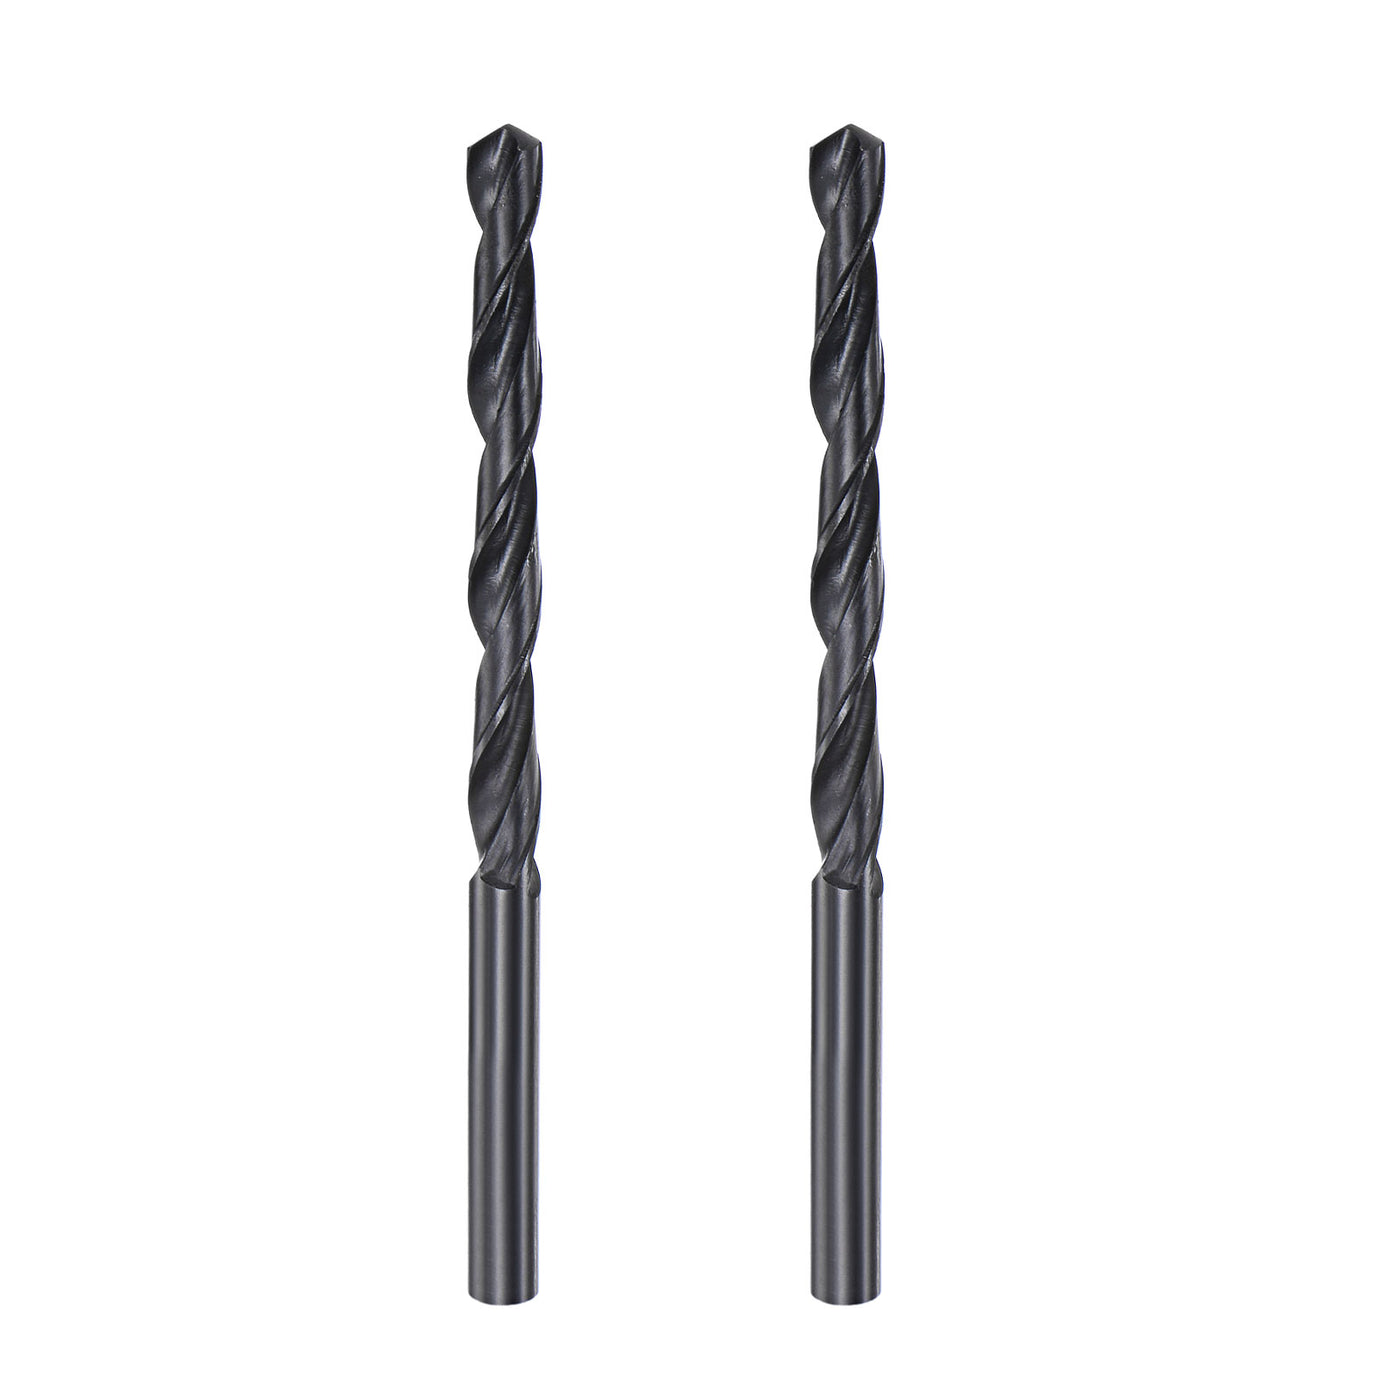 uxcell Uxcell High Speed Steel Twist Drill Bit, 5.6mm Fully Ground Black Oxide 93mm Long 2Pcs